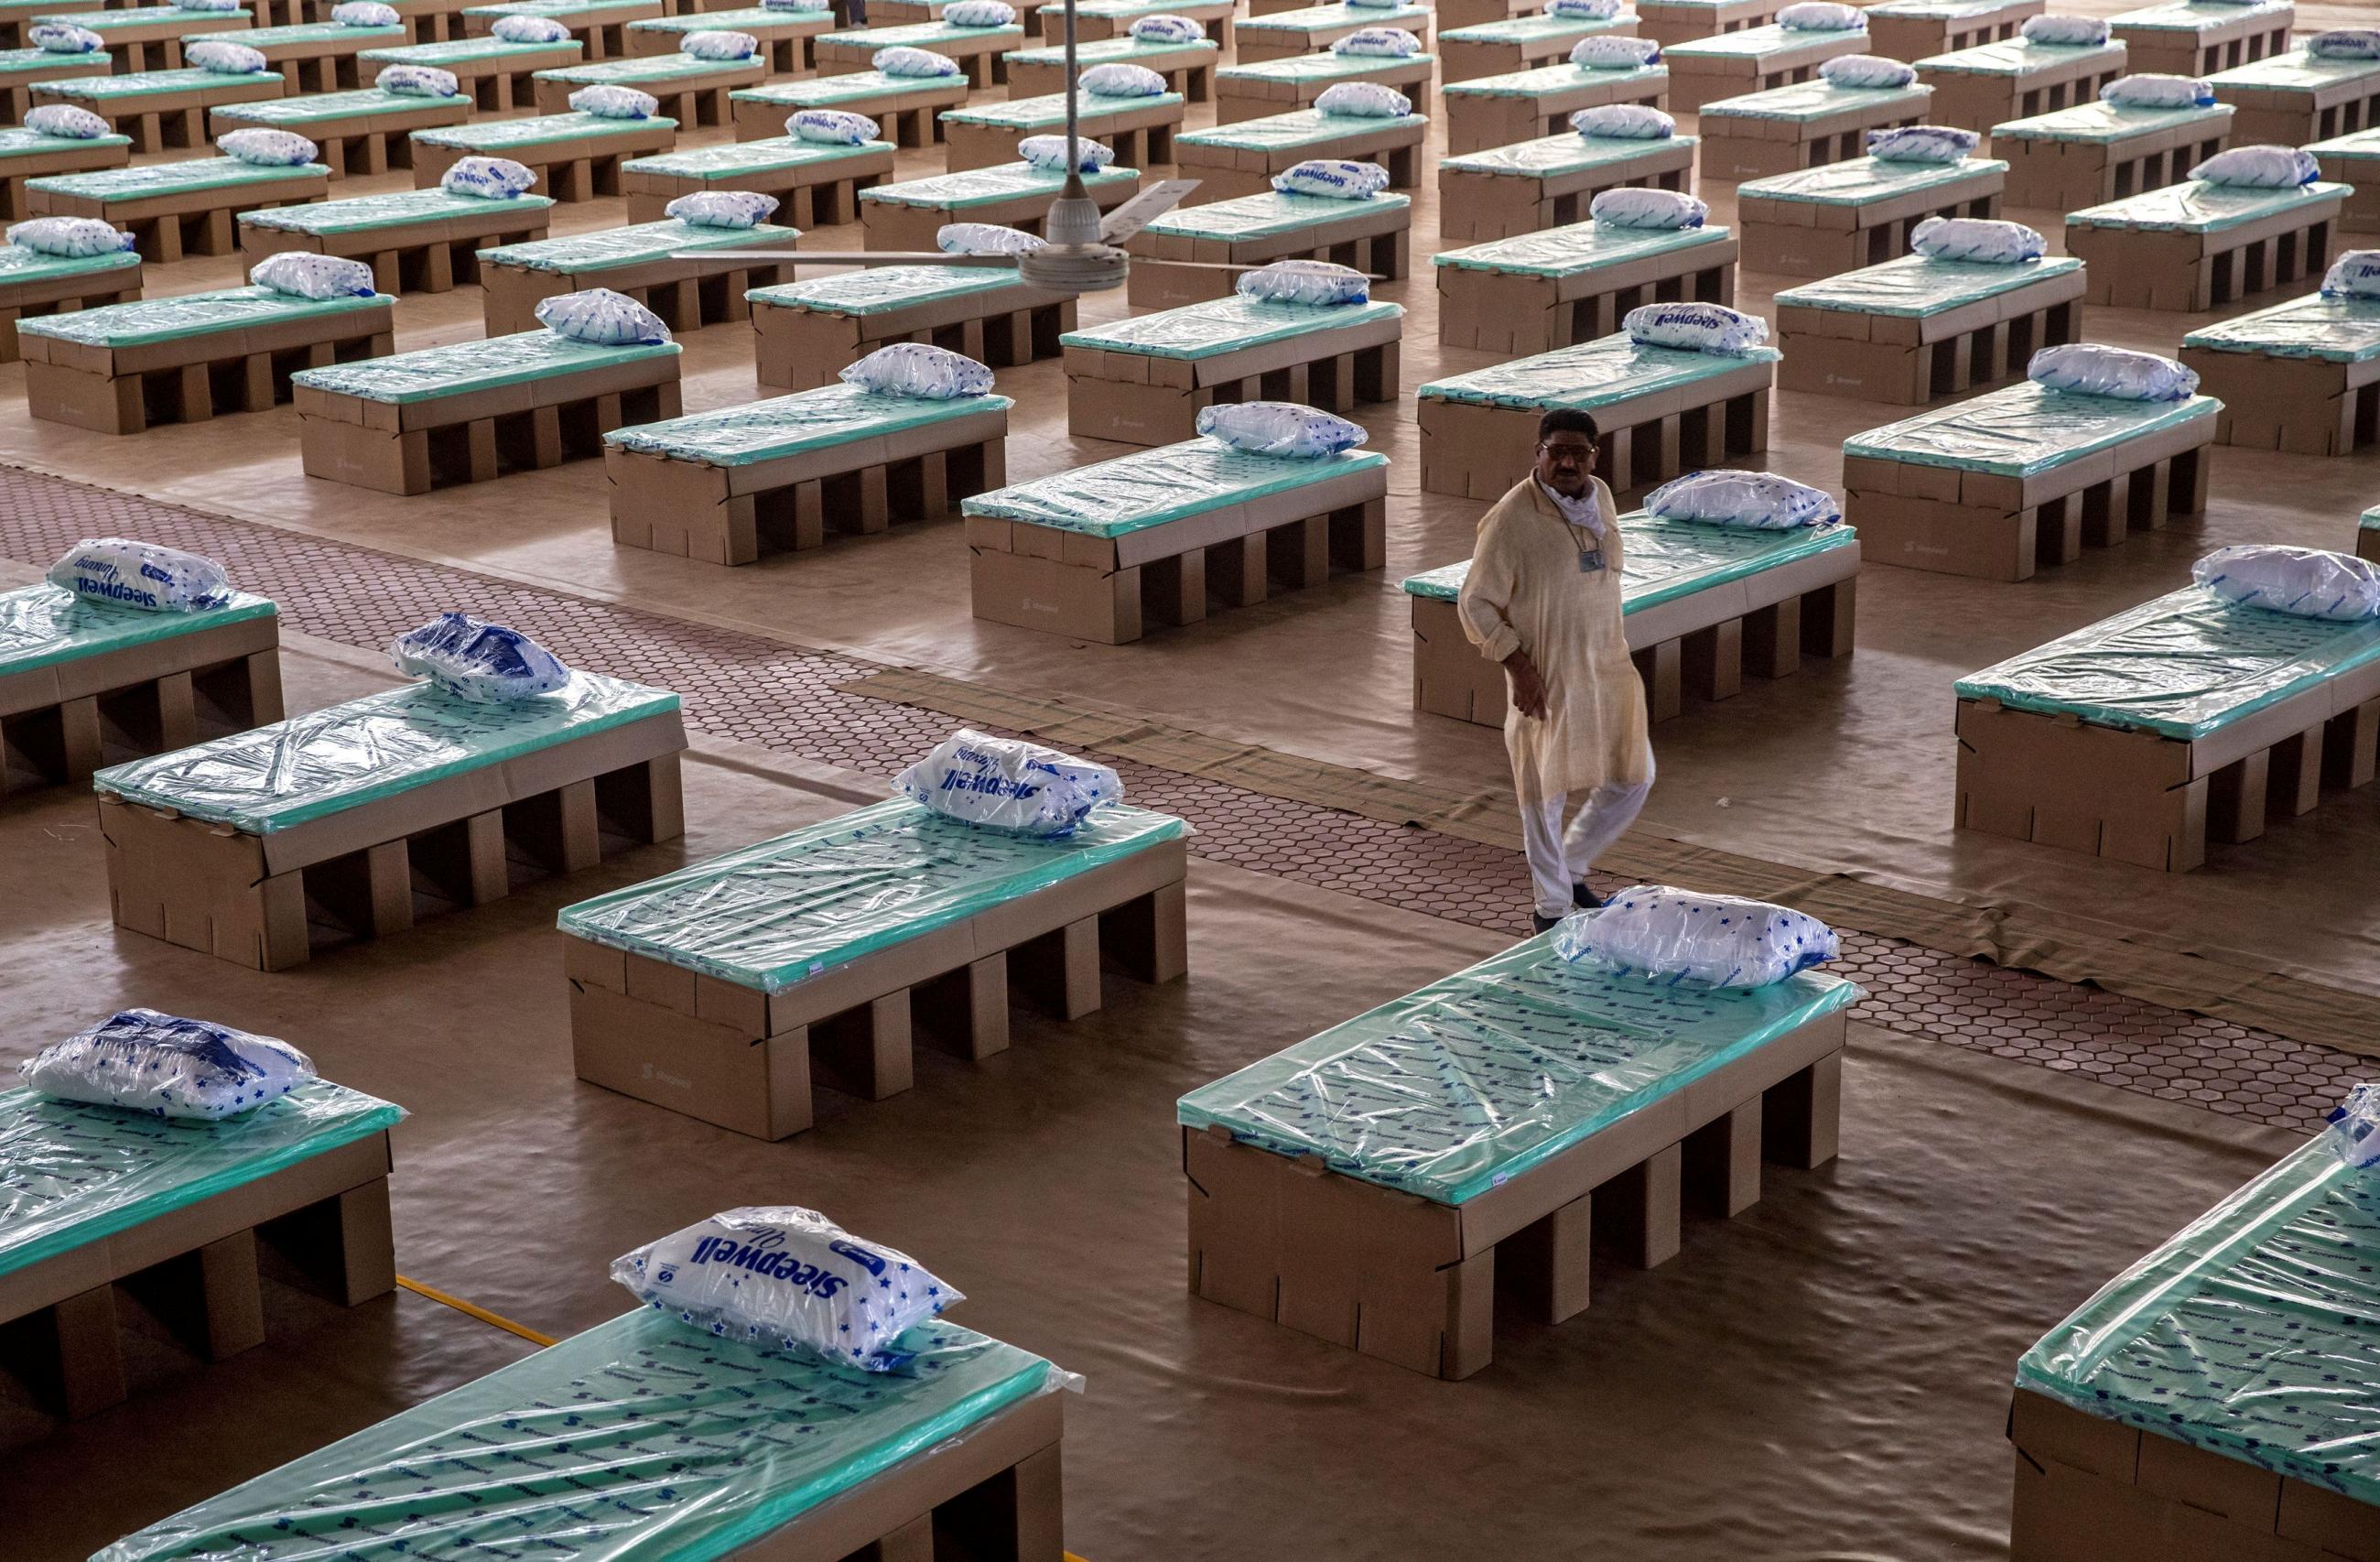 A volunteer walks past disposable beds made out of cardboard at the campus of Radha Soami Satsang Beas, a spiritual organization, where a coronavirus disease (COVID-19) care centre has been constructed for the patients amidst the spread of the disease, in New Delhi, India, on June 26, 2020.